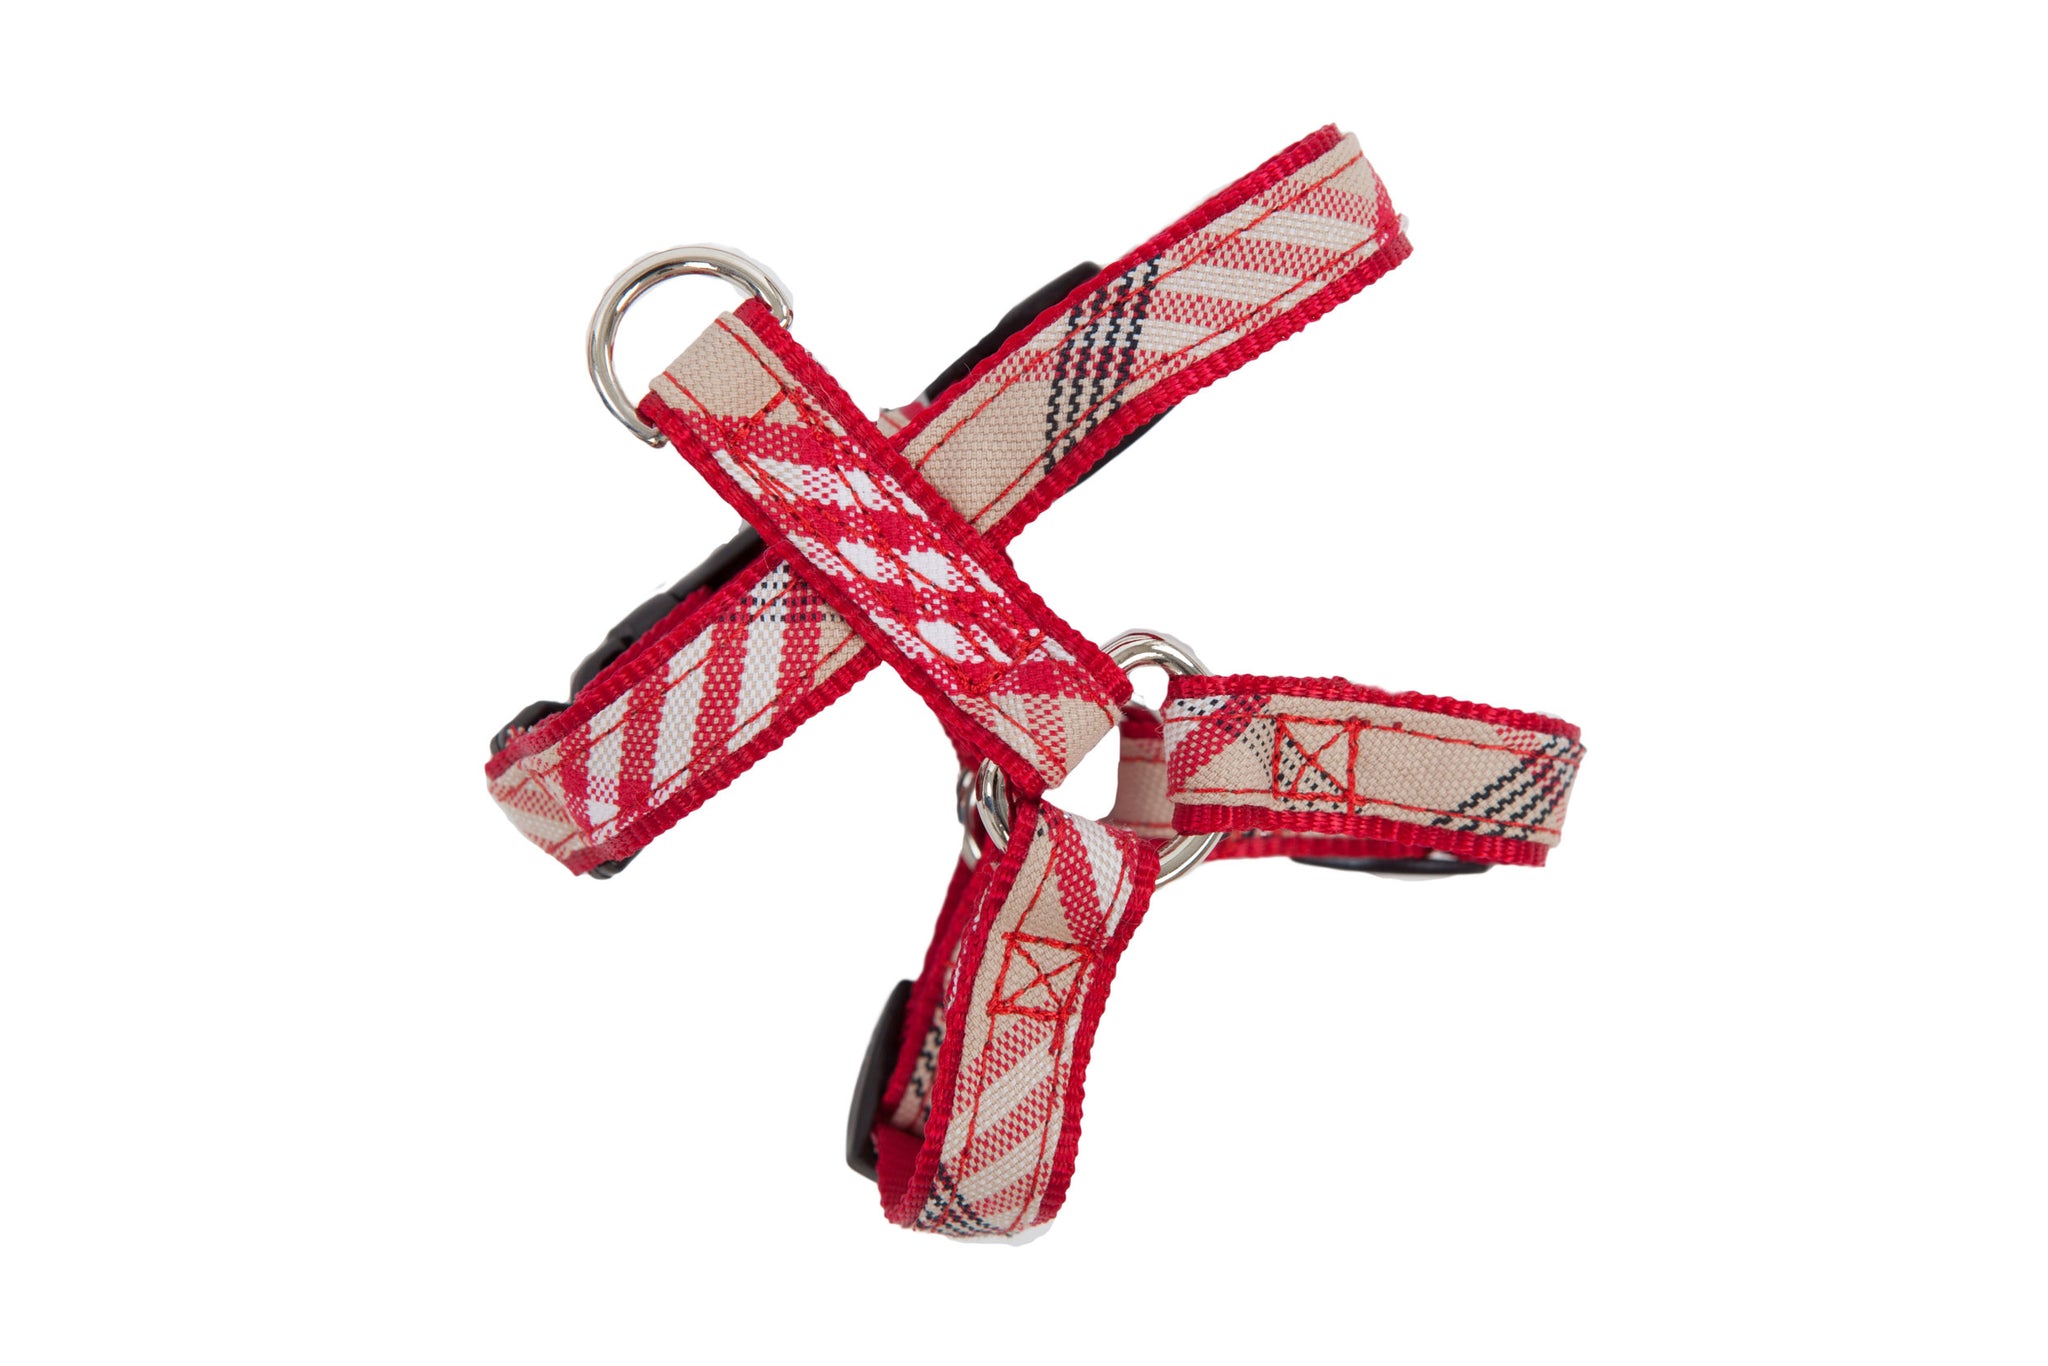 Plaid Signature Collection - Collar, Harness, & Lead - Red Plaid